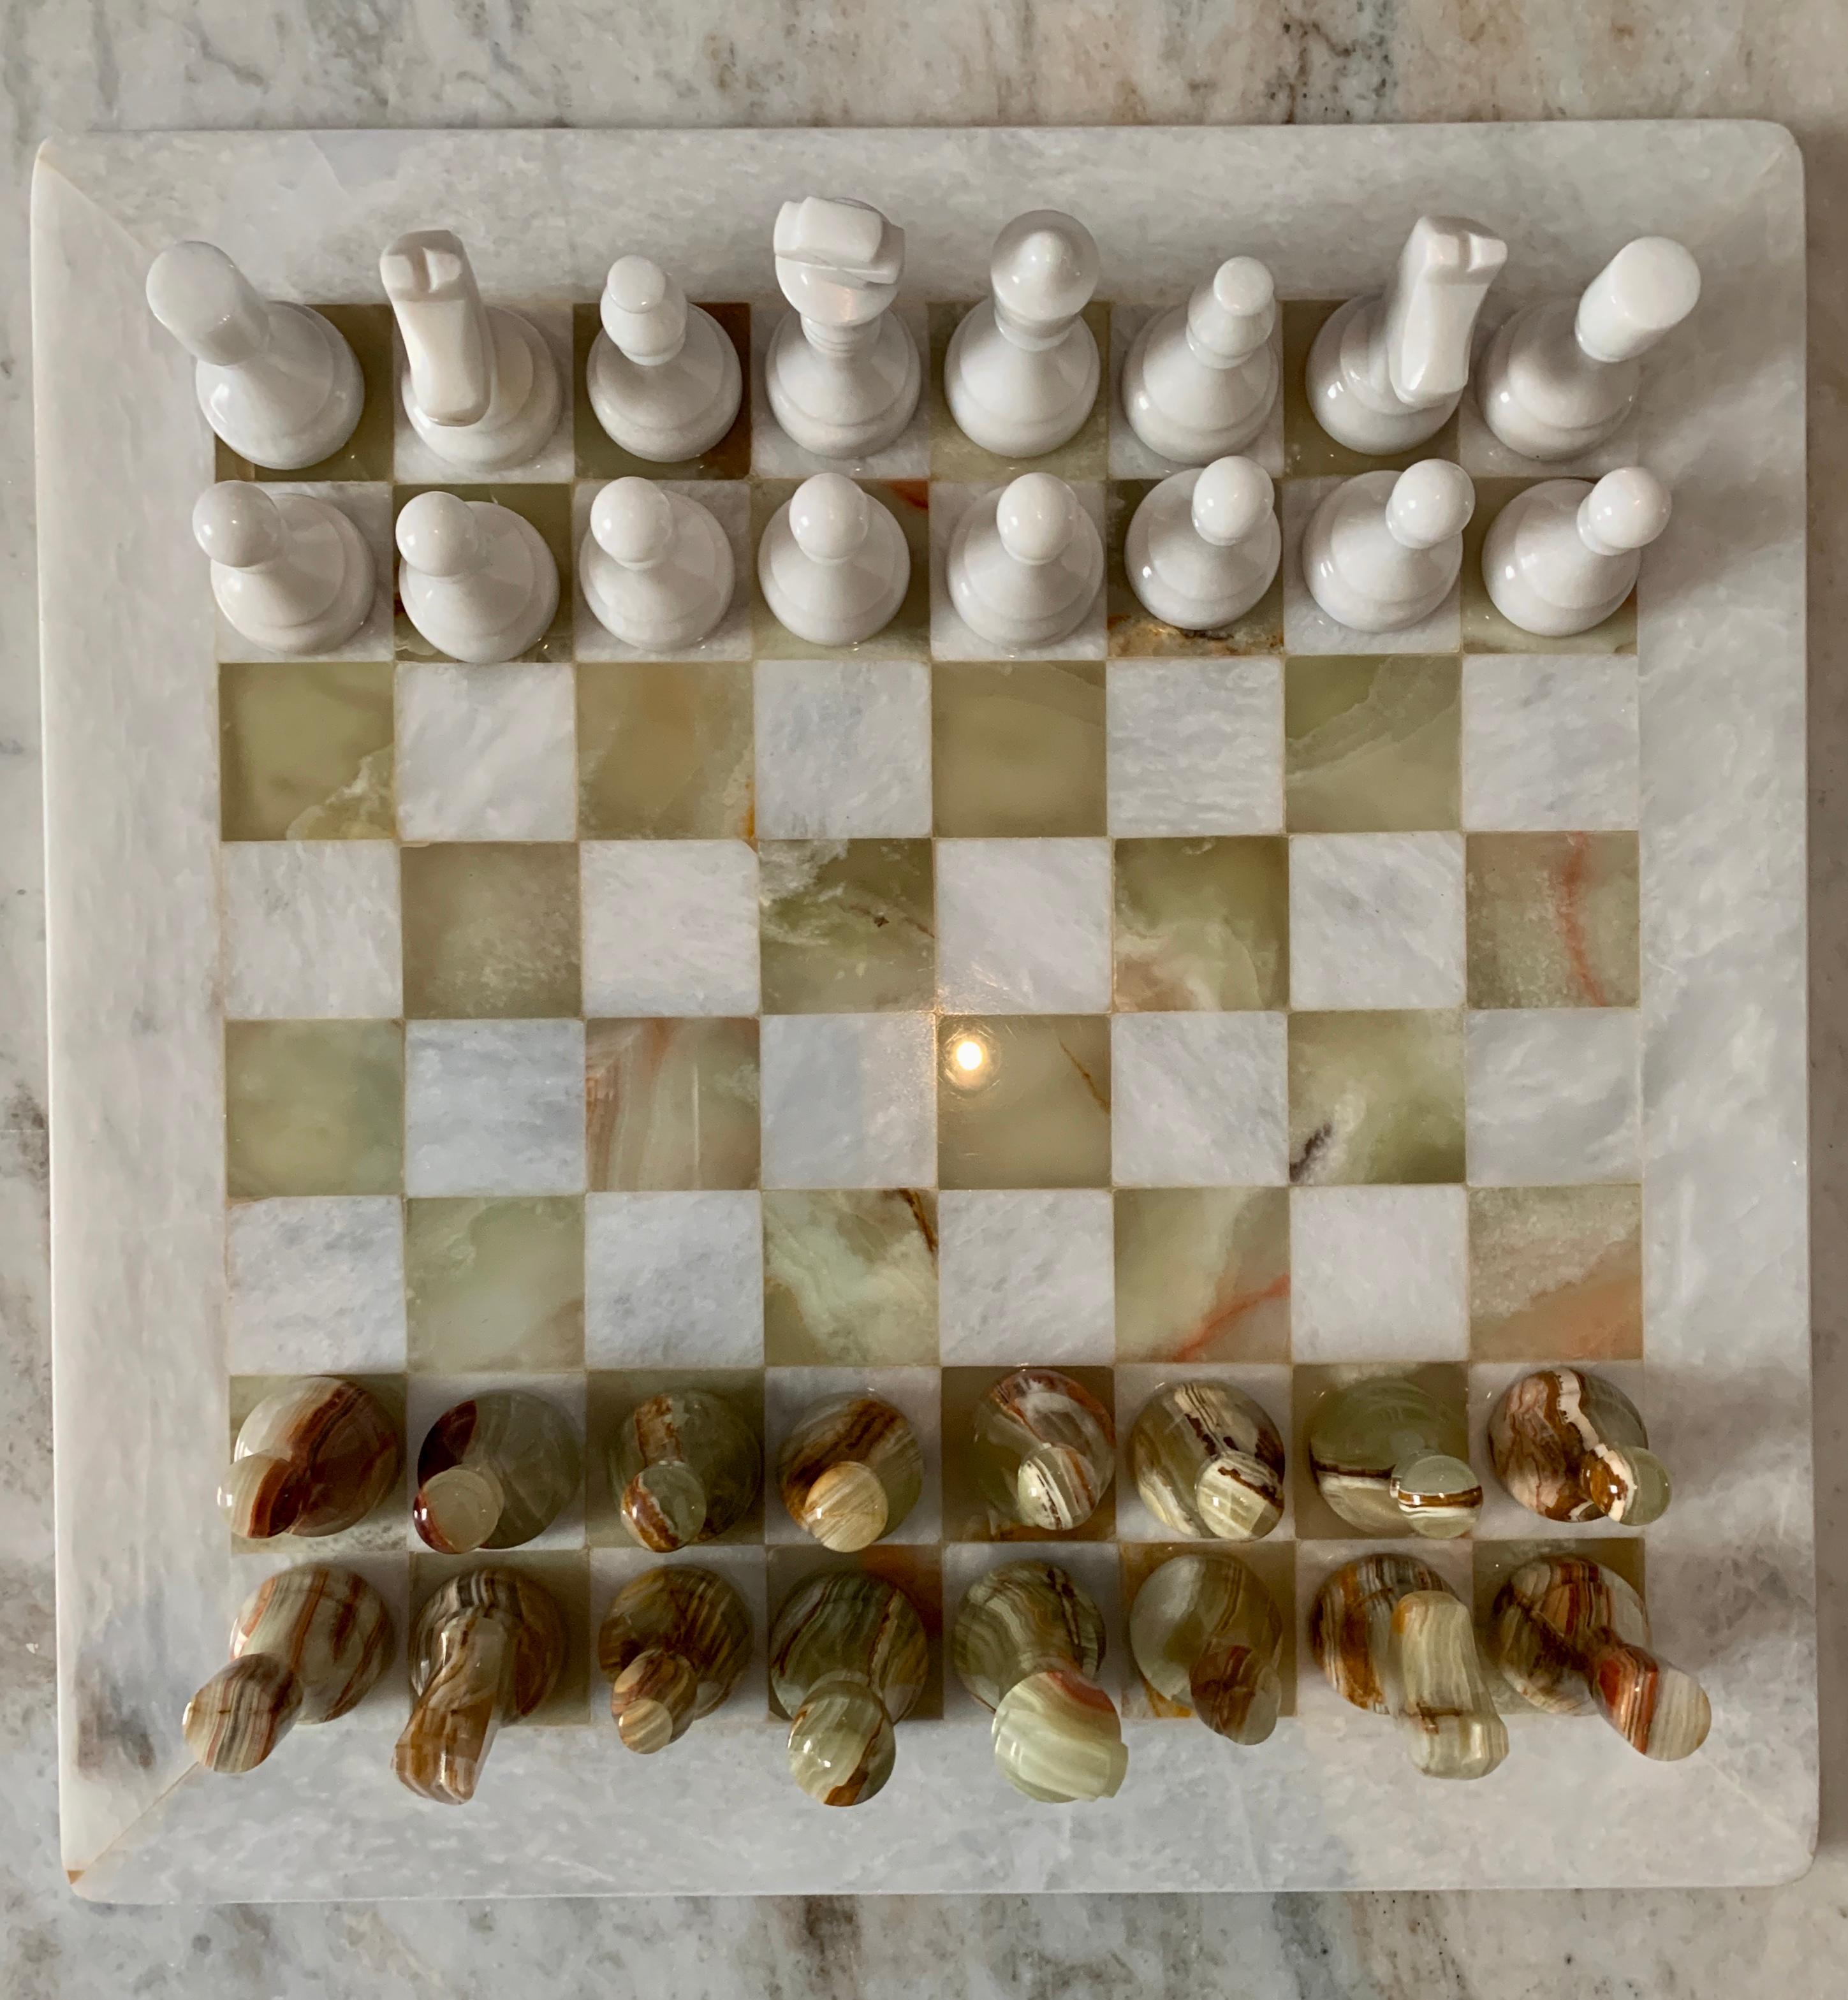 Pakistani Handmade Onyx and Marble Chess Board and Pieces